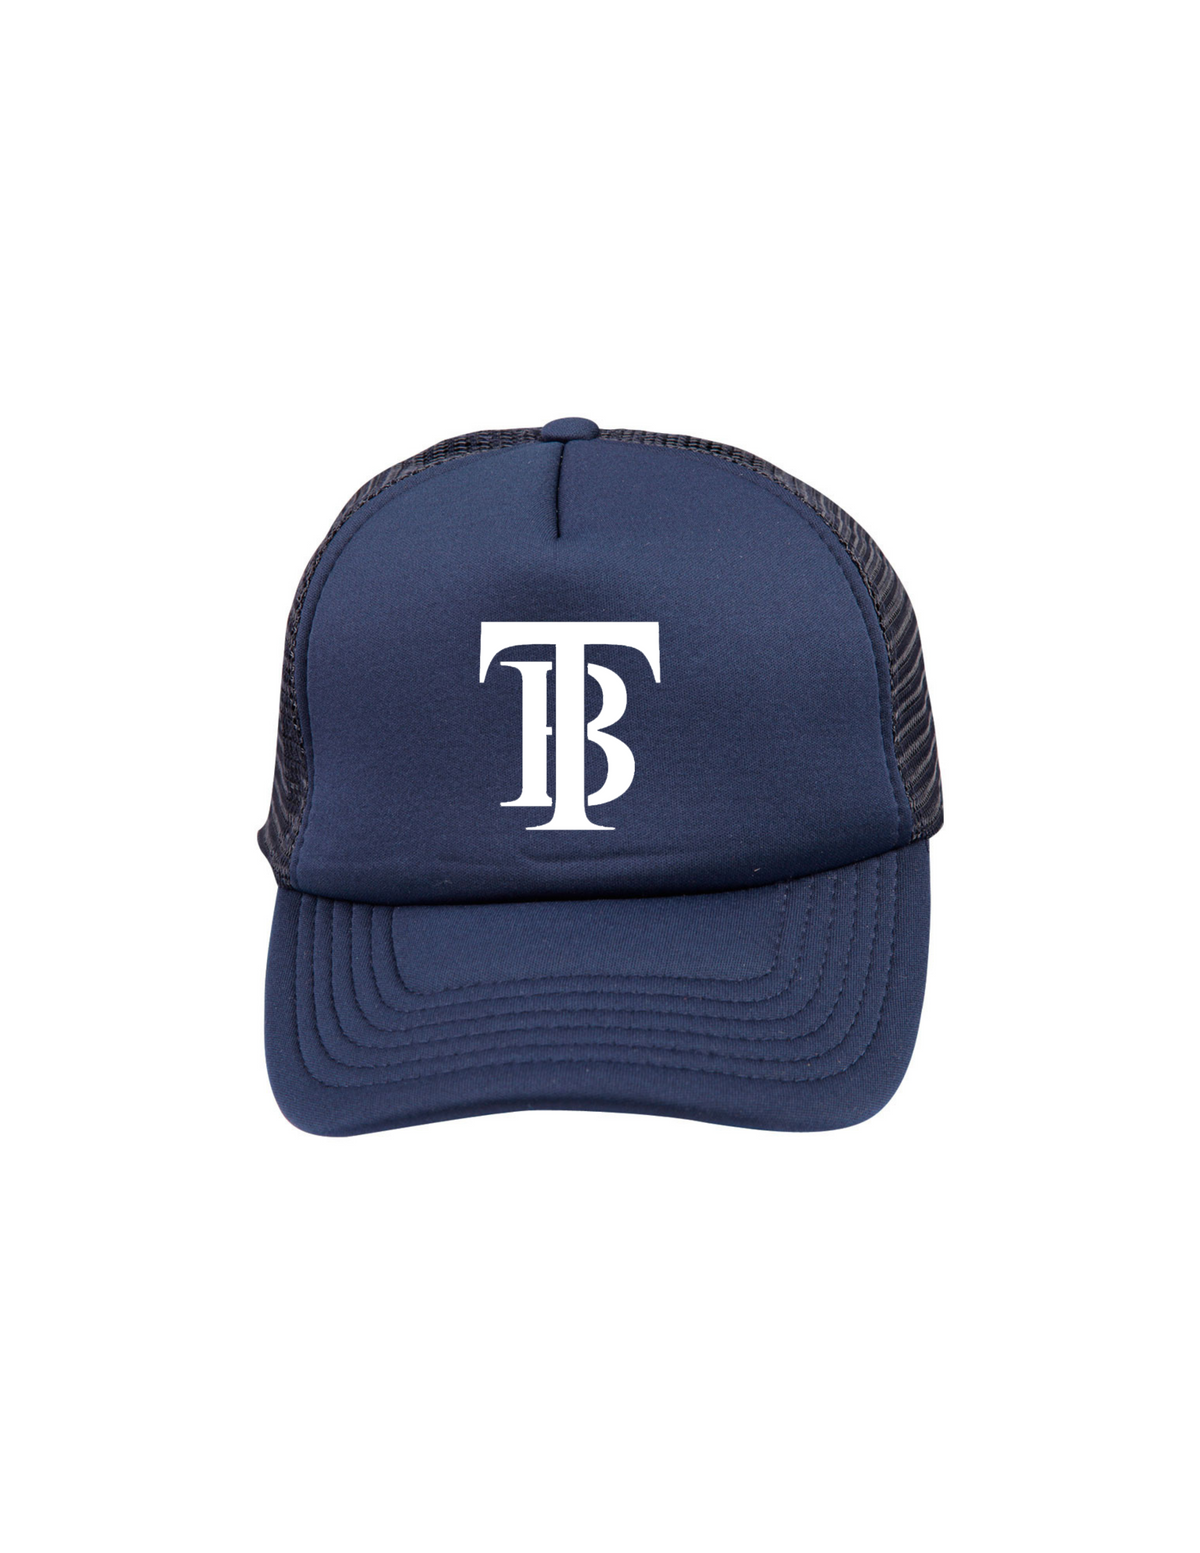 Tumby Bay TB Embroidered 3D Trucker Cap Navy-Collins Clothing Co